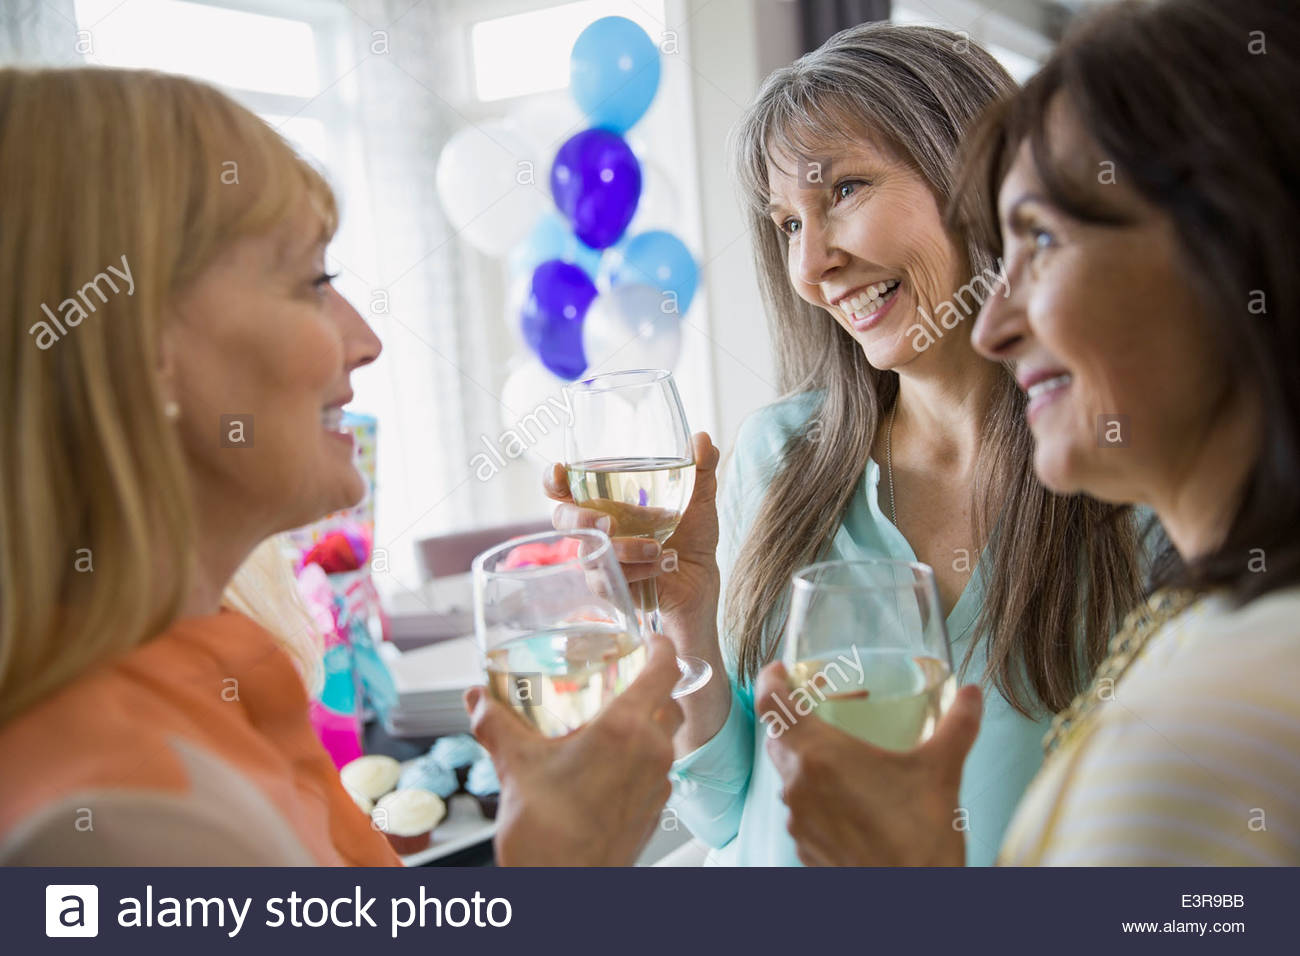 Women talking and drinking white wine at party Stock Photo